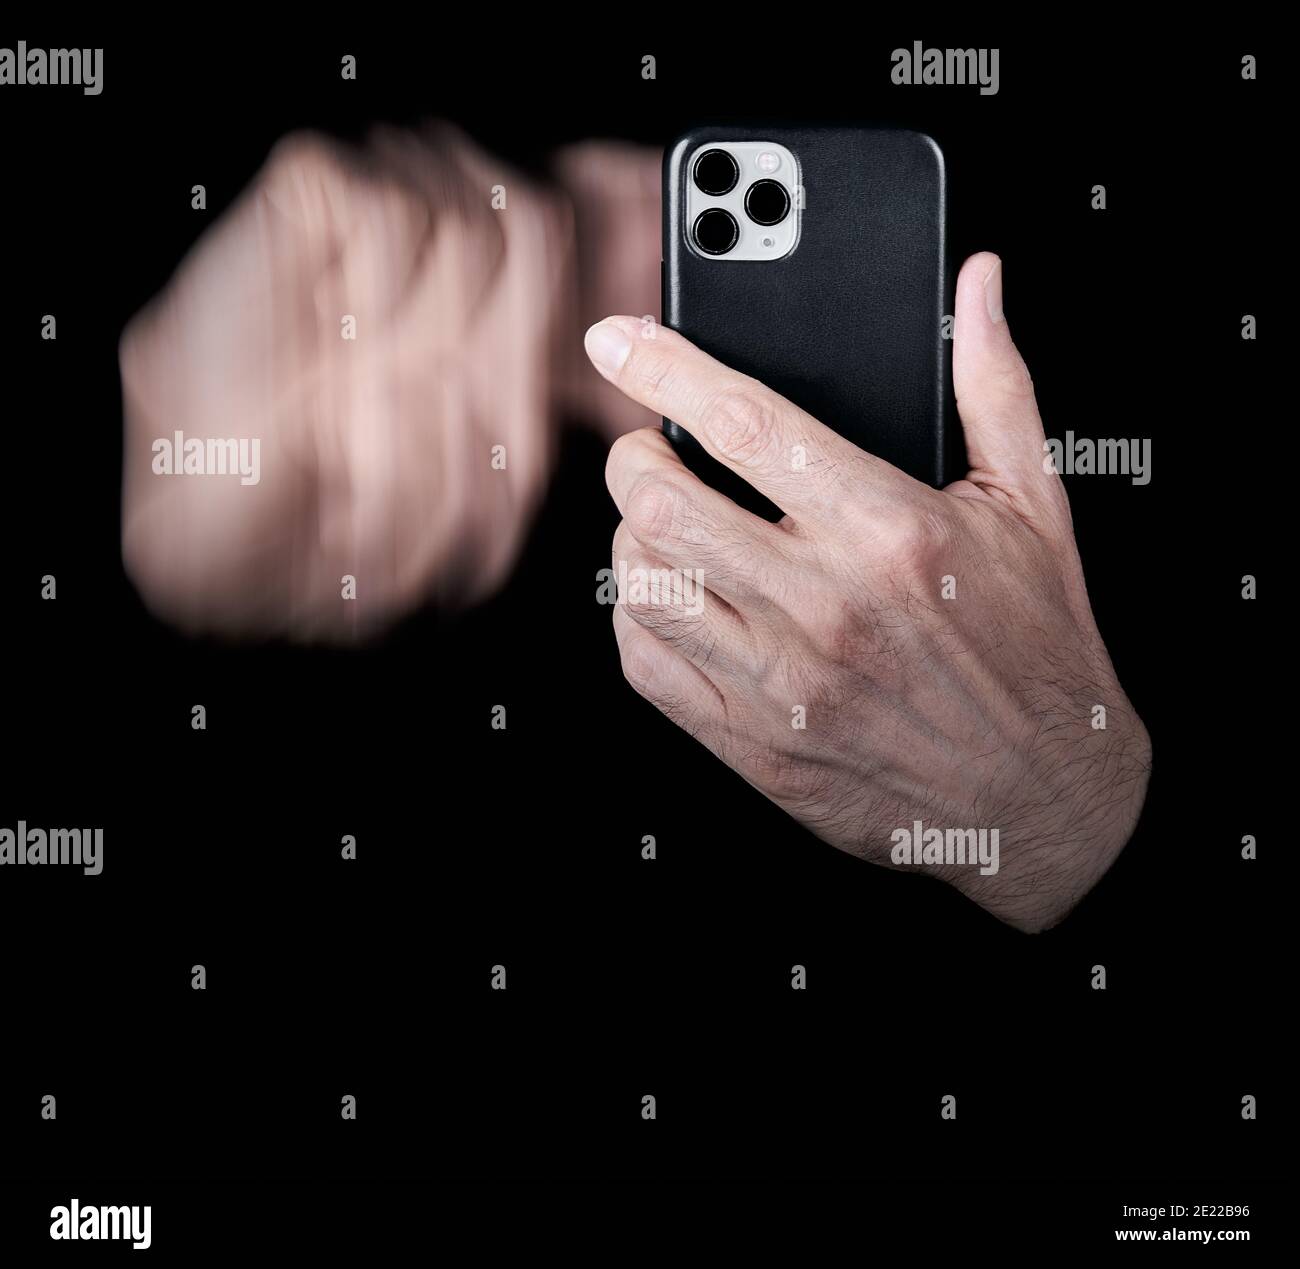 Hand scrolling gesture on smartphone screen with black cover and black background Stock Photo